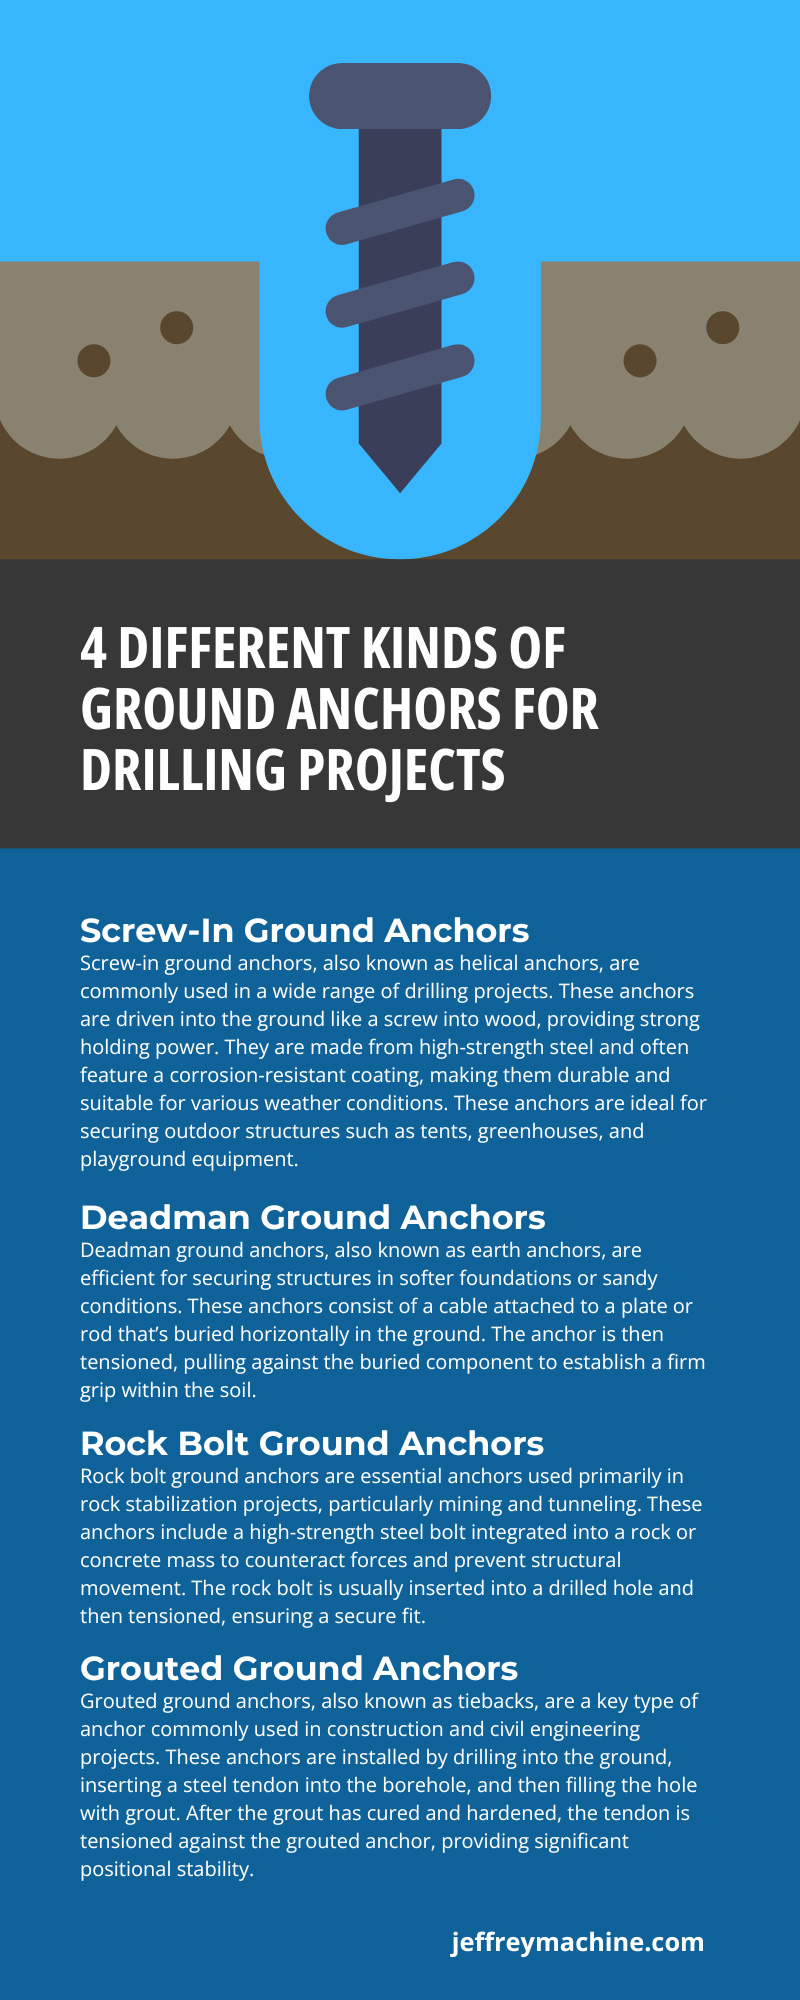 4 Different Kinds of Ground Anchors for Drilling Projects